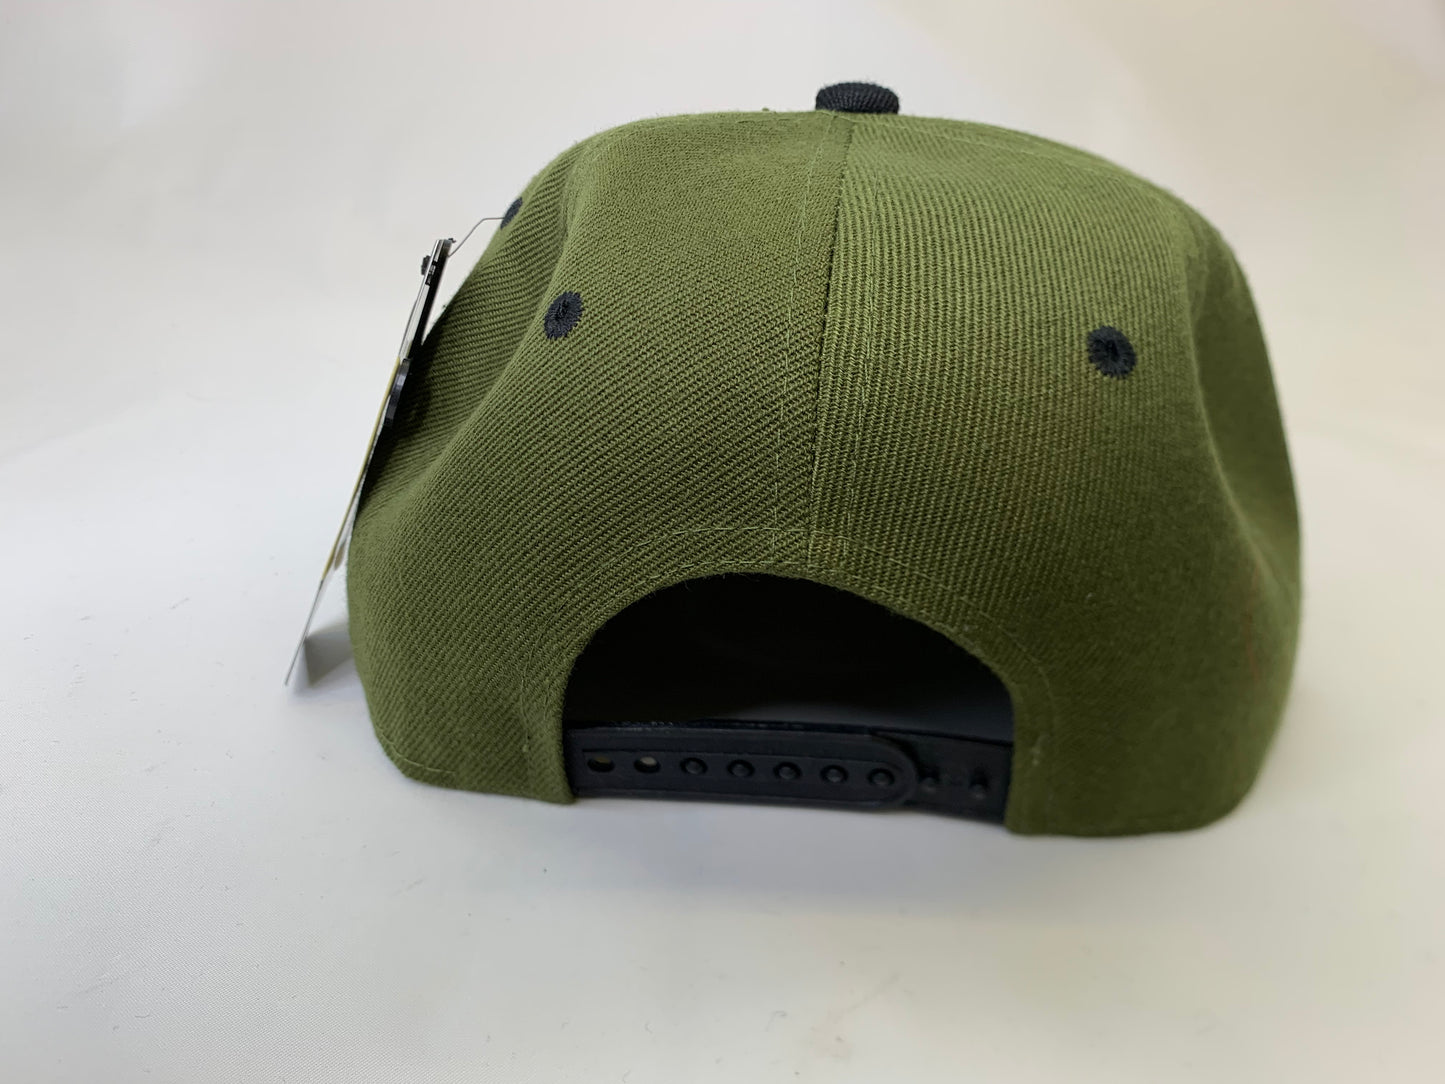 Green and Black Jean-Michel Mosaic Crown Hat